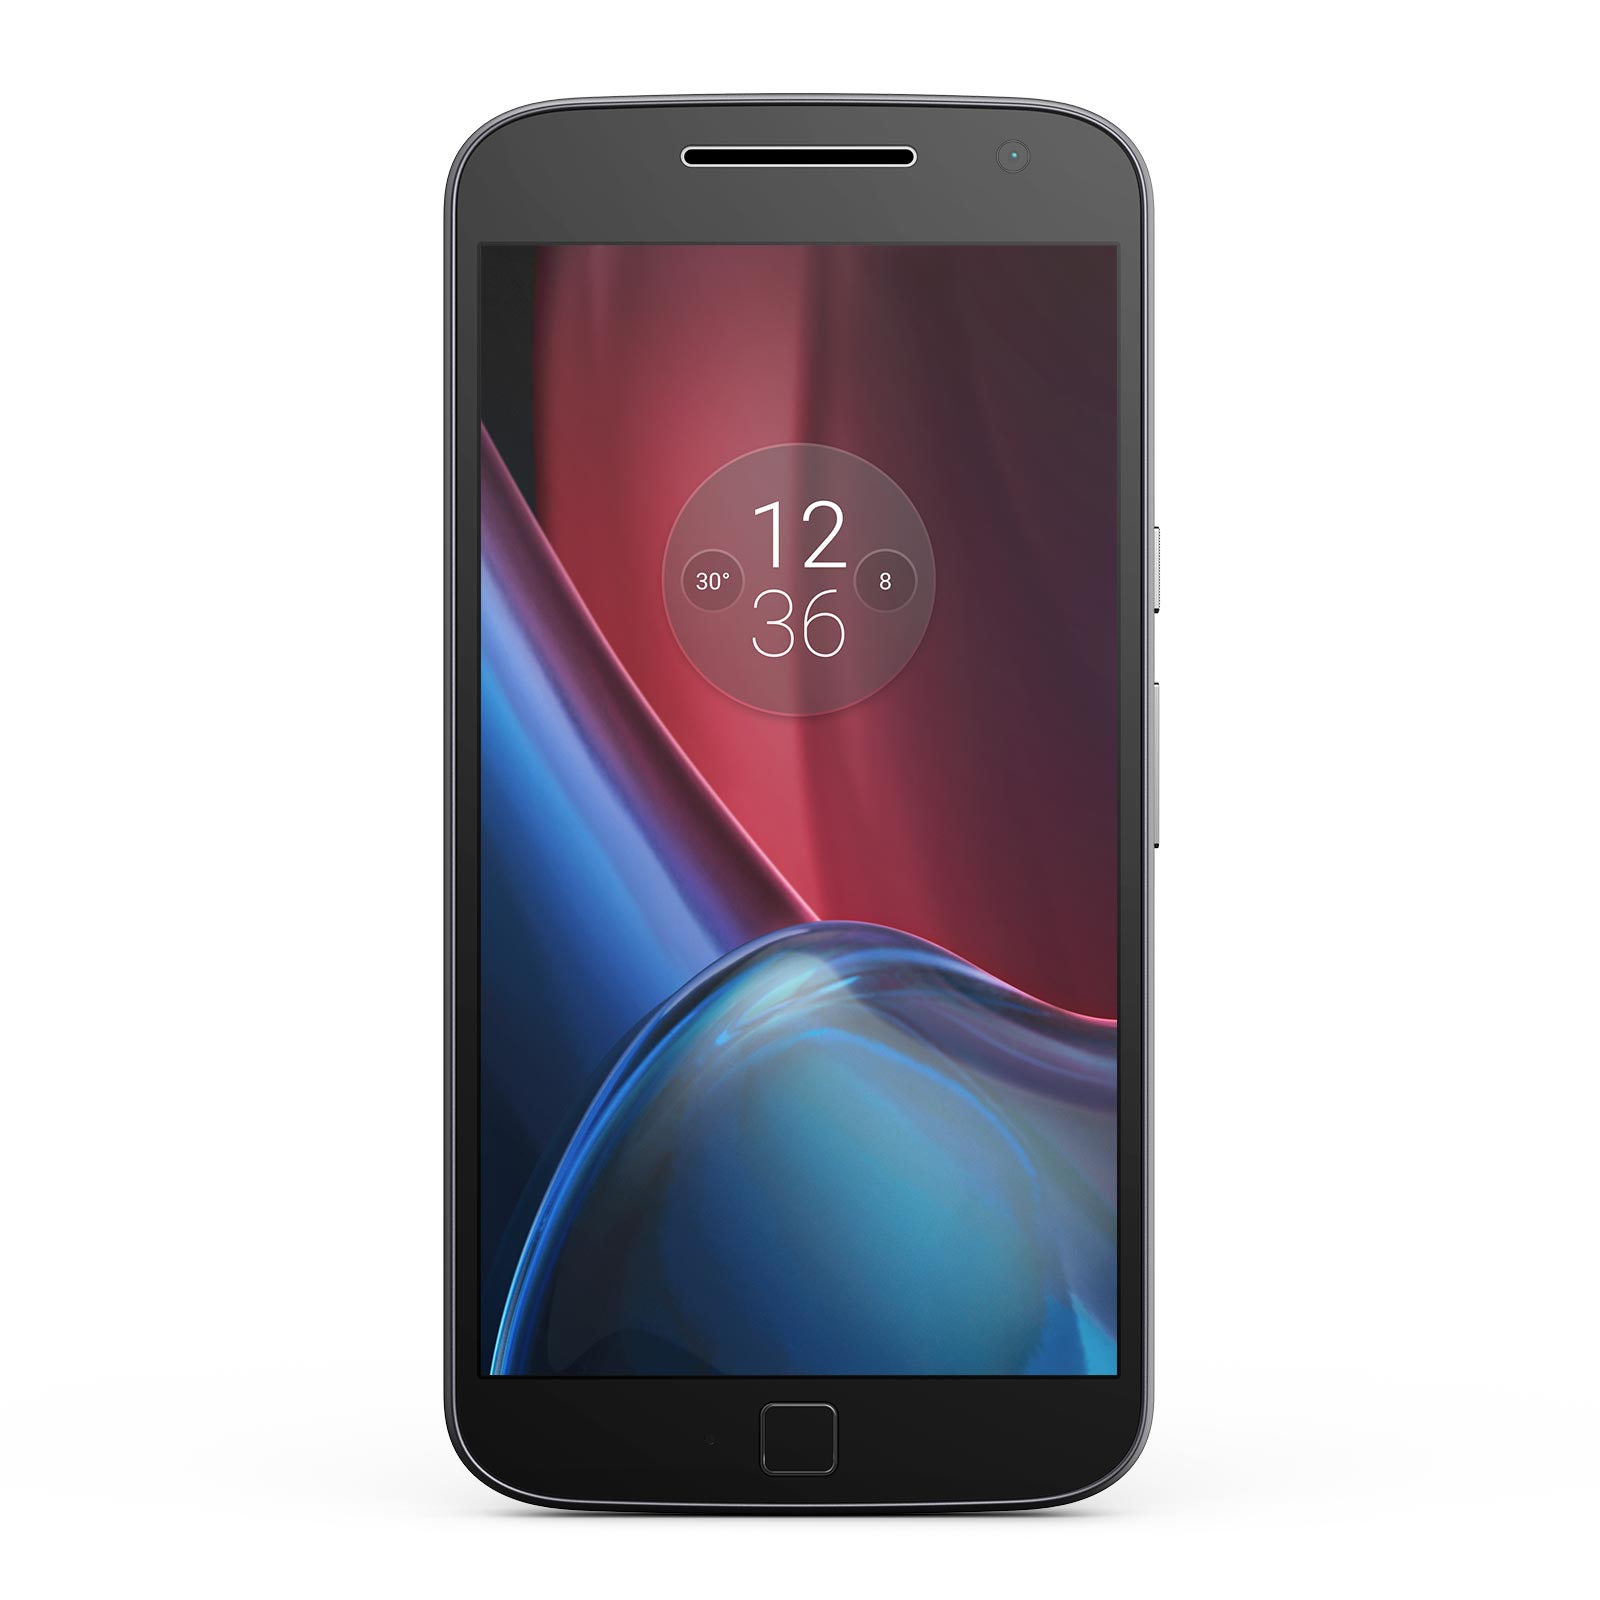 Motorola Moto G4 Plus specs and reviews – Pickr – Australian technology news, reviews, guides to help you